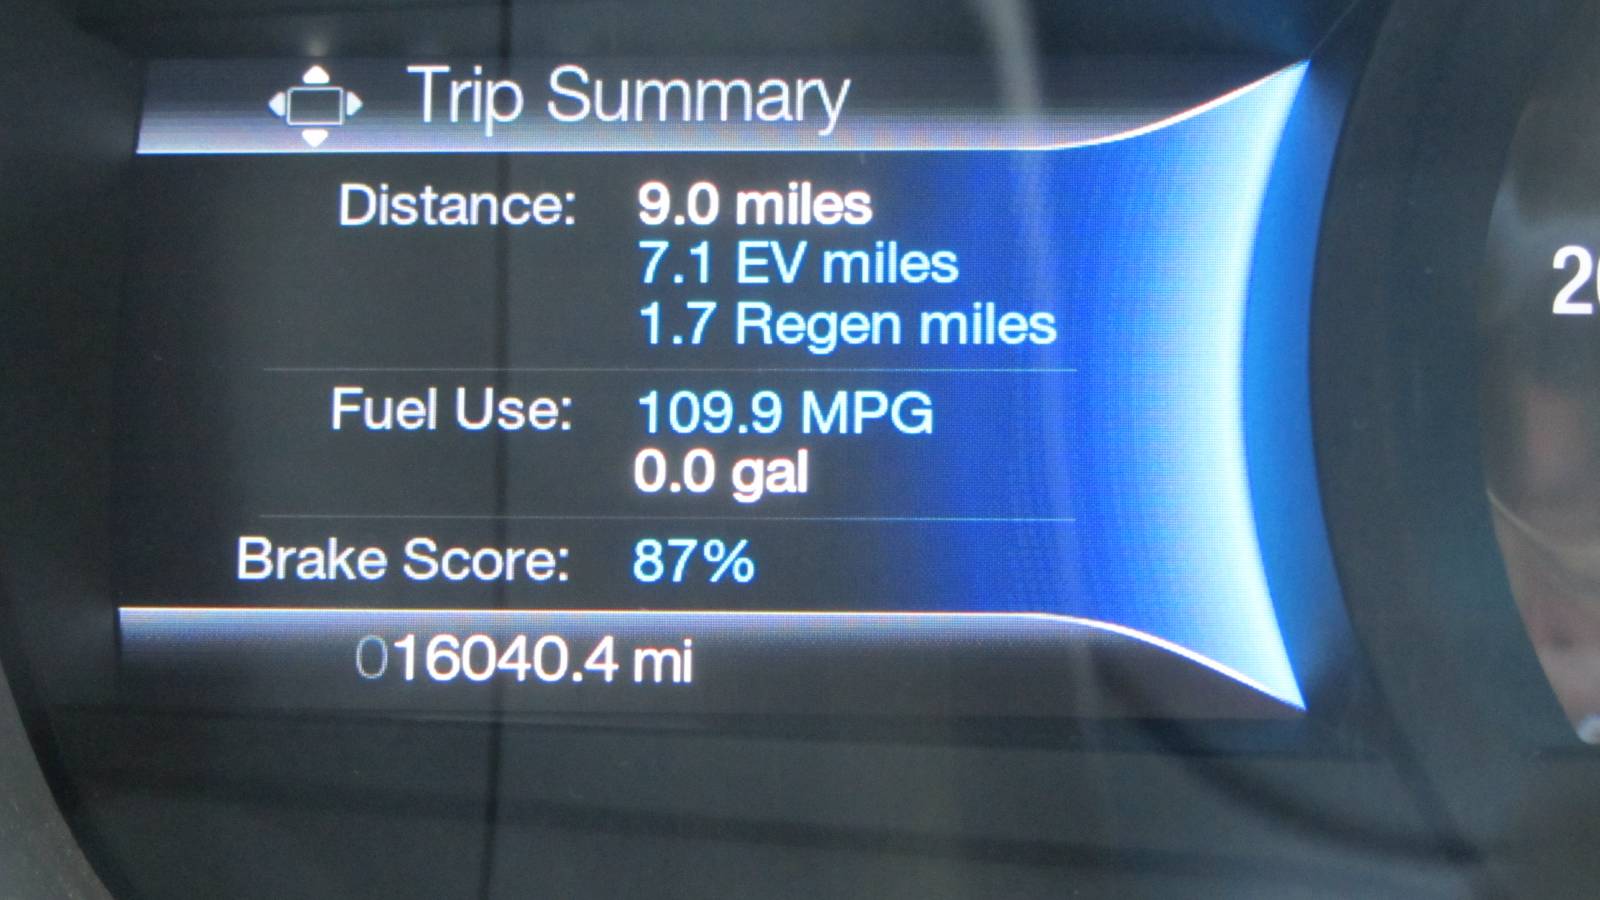 Amazing mileage for a short trip!